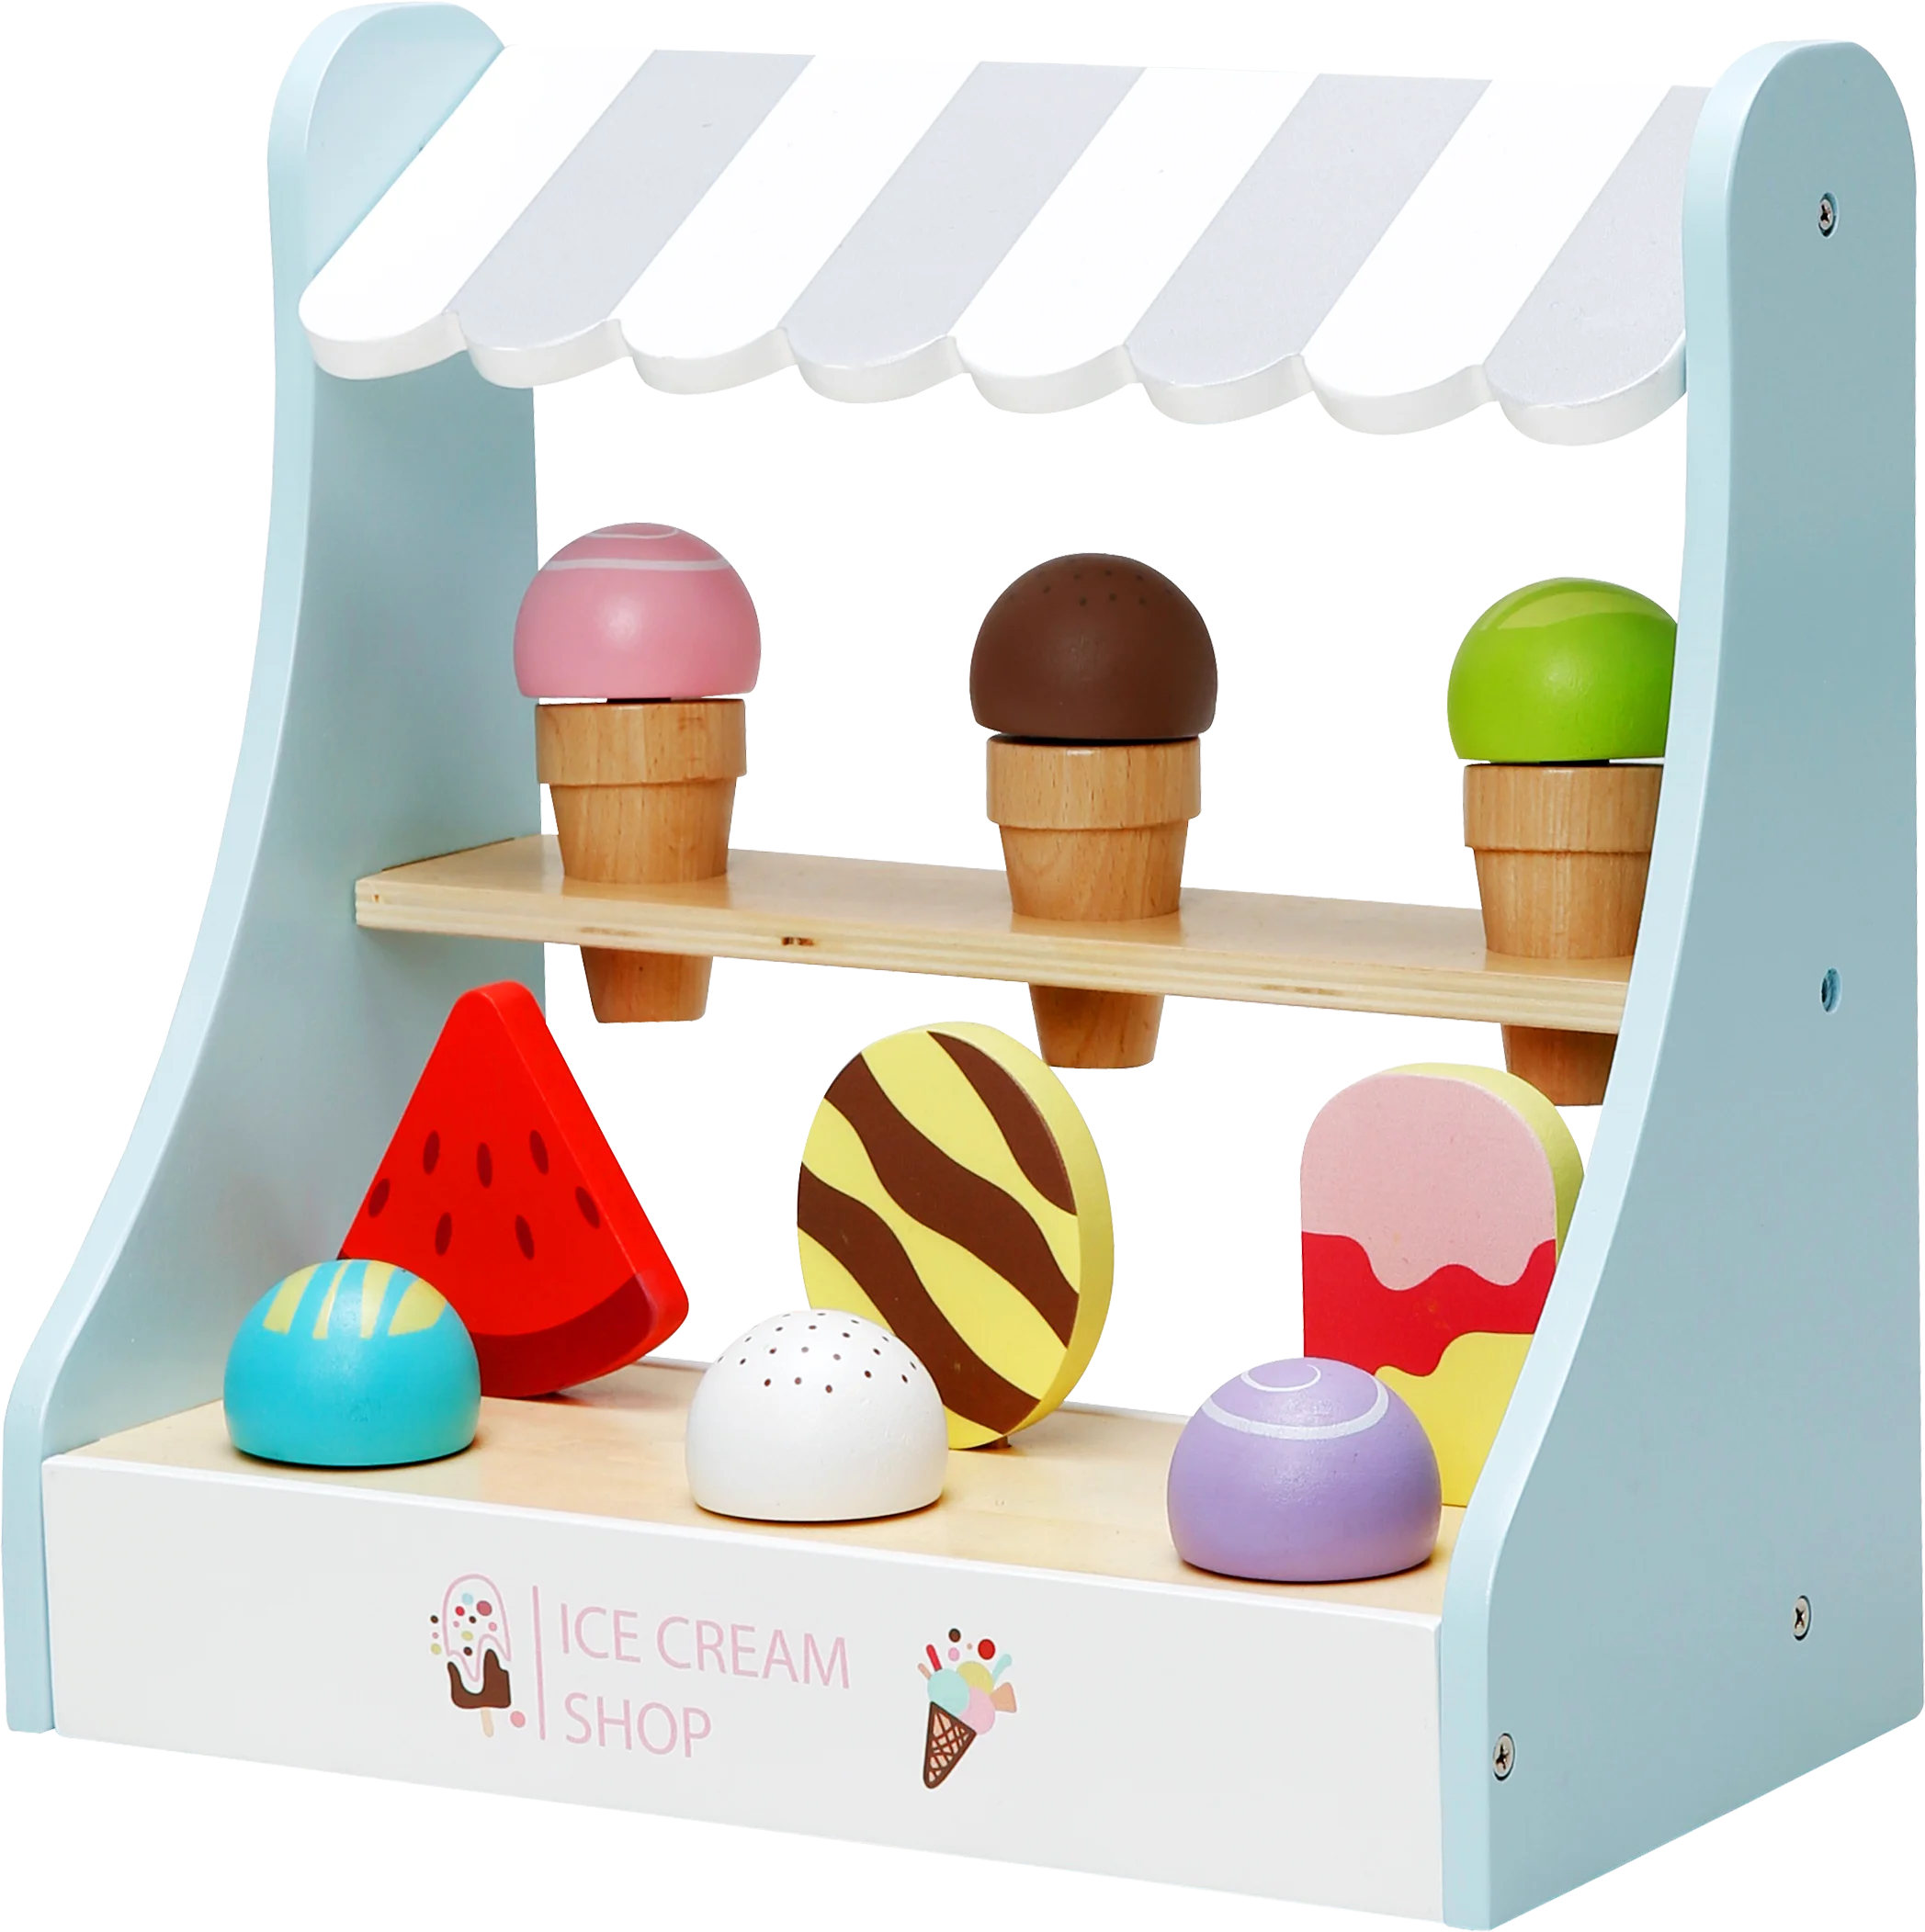 
Hot Selling Wooden Food Ice Cream Cart Play Set with Accessories for Pretend Play  (1600203456087)